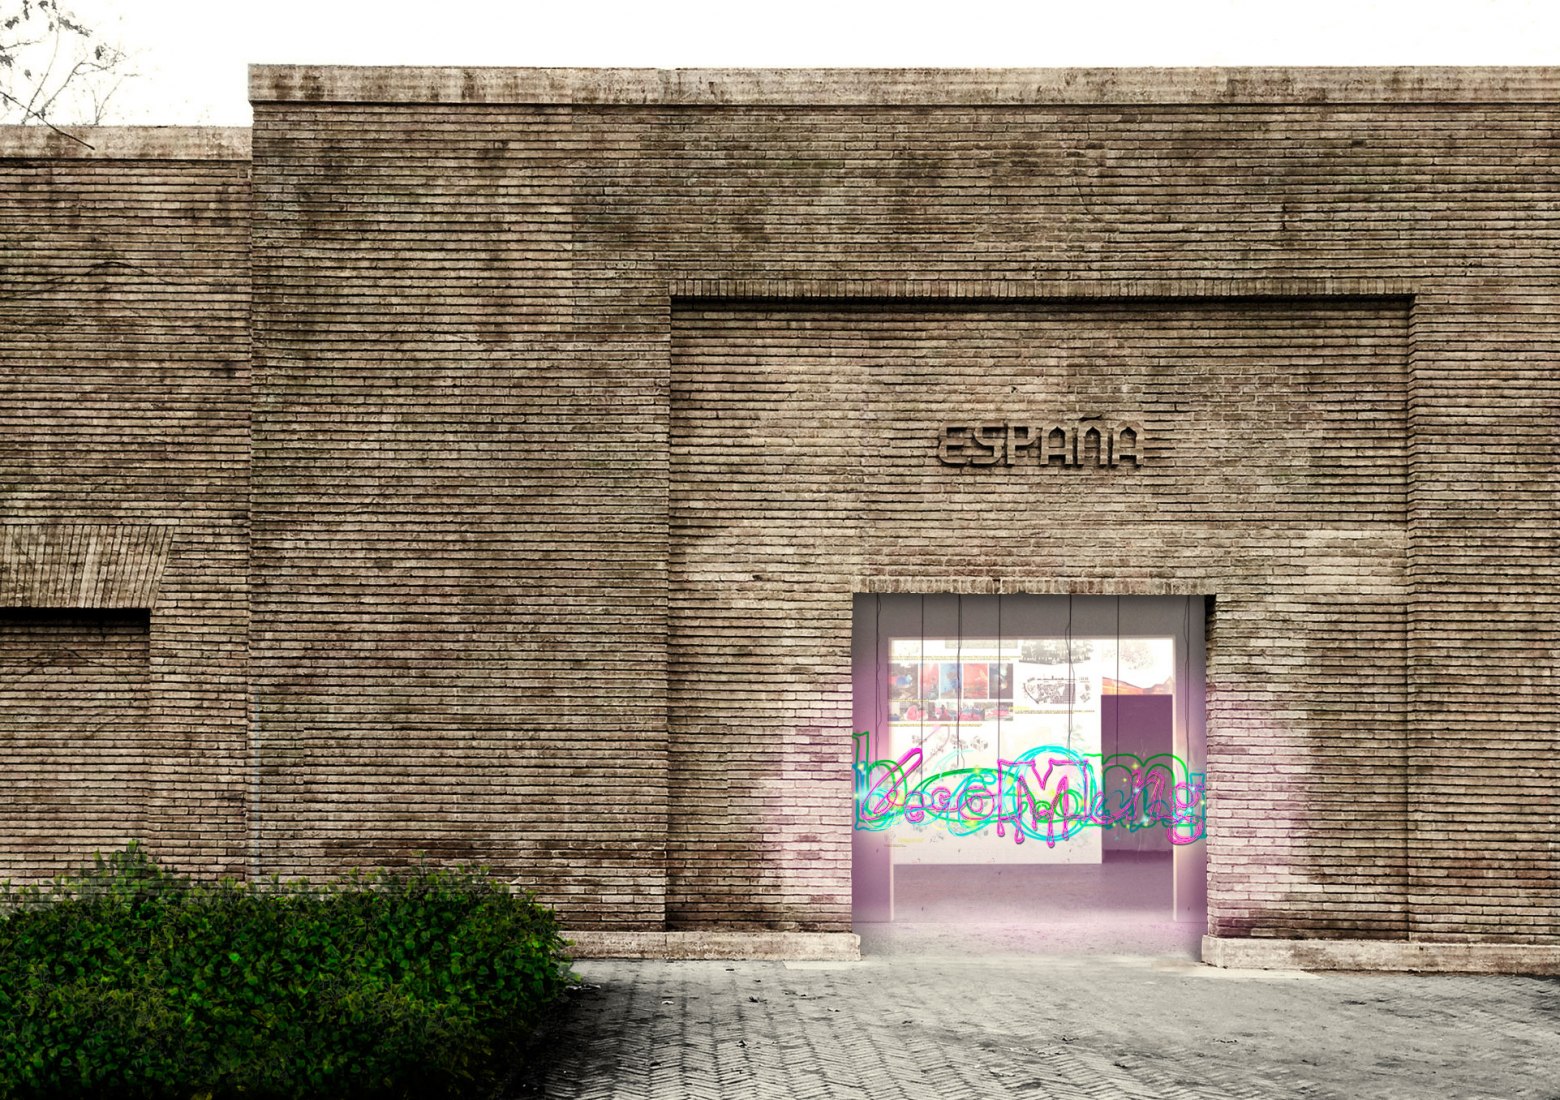 becoming. Rendering of proposal for the Spanish pavilion.